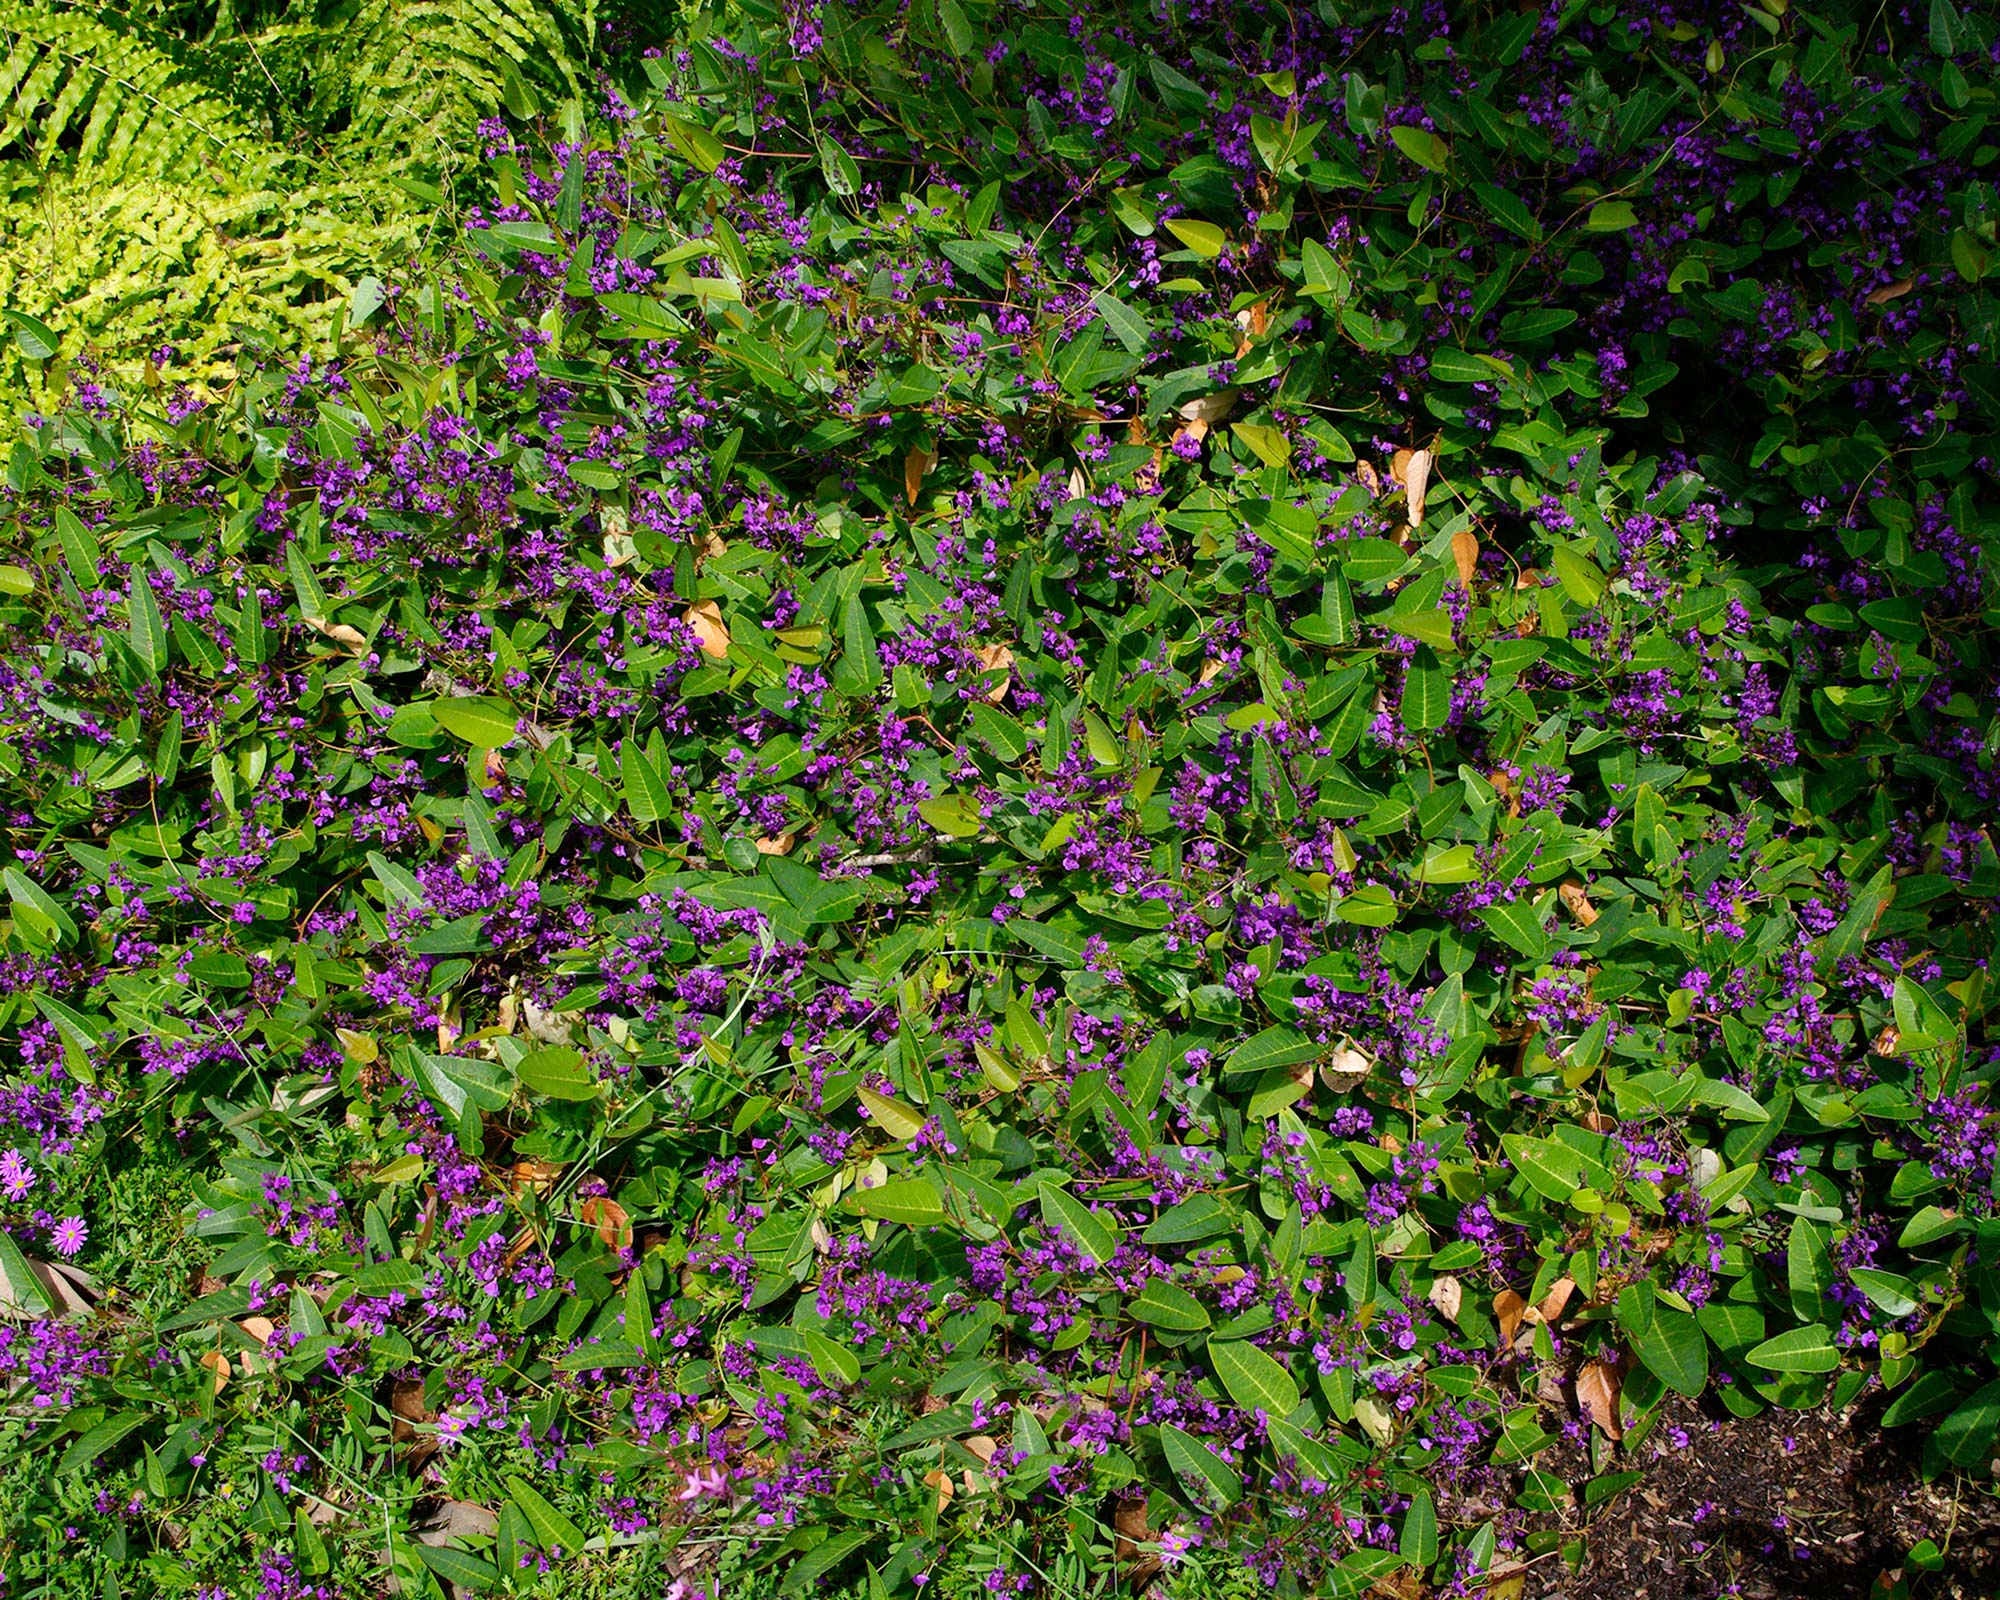 Hardenbergia violacea - used for groundcover